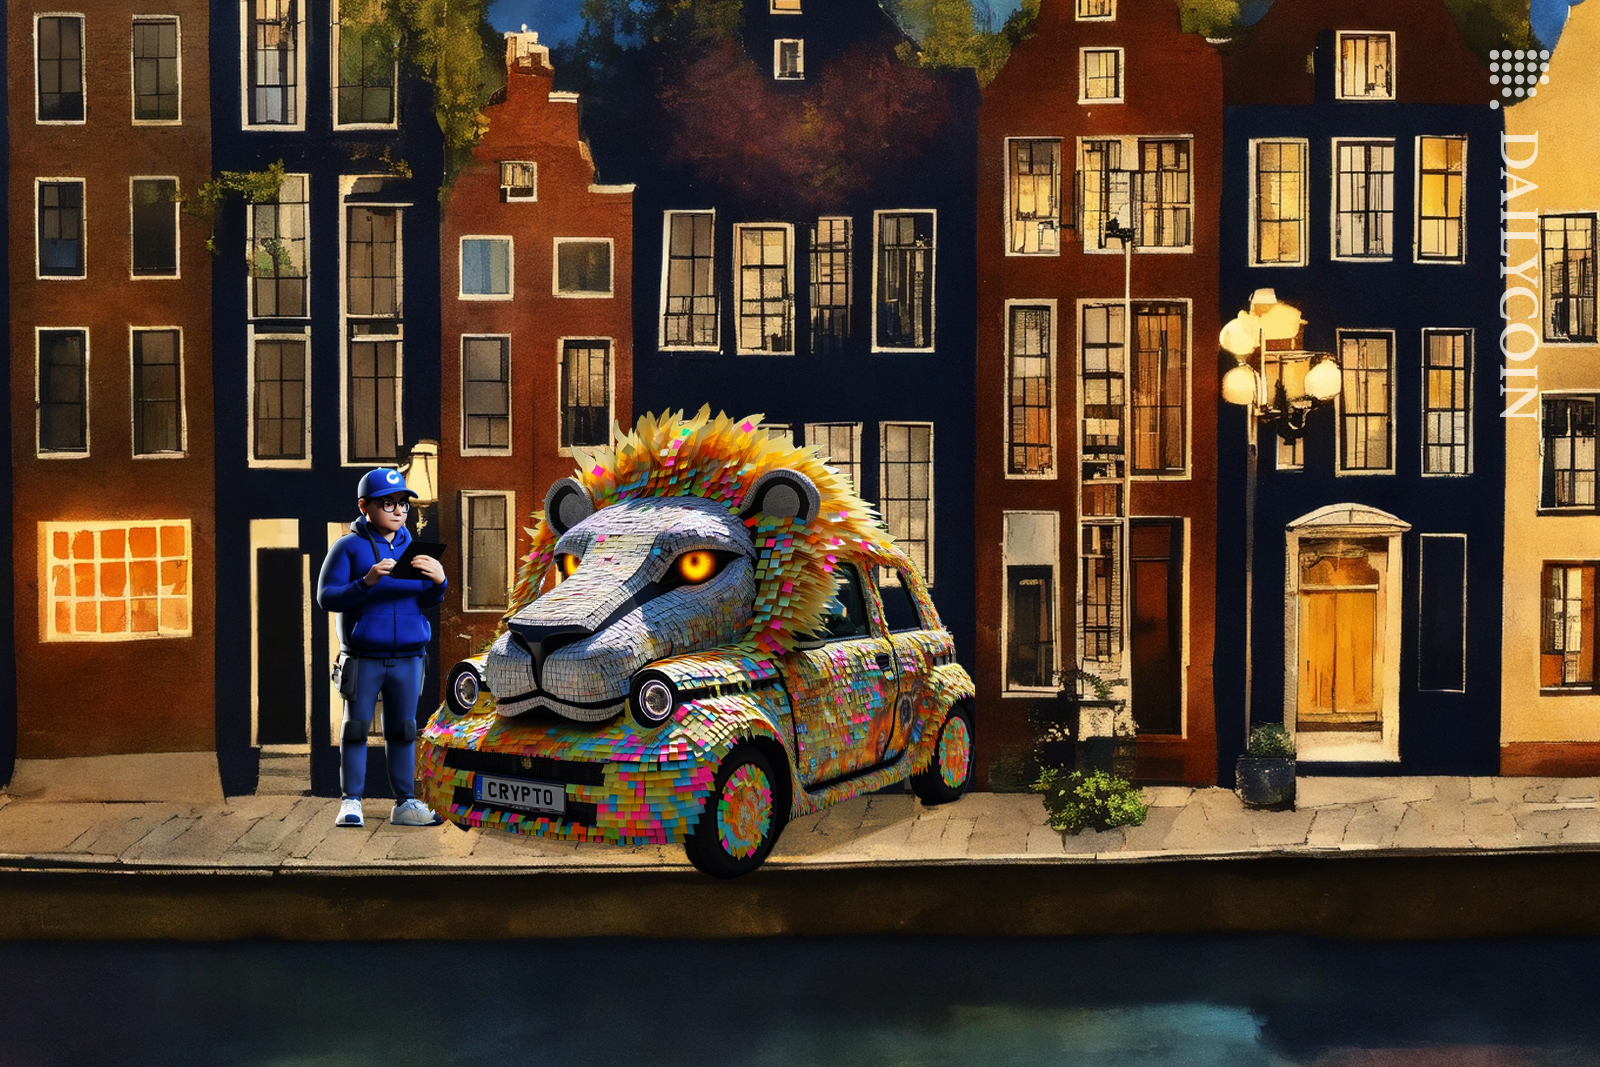 Crypto.com mascot verchile keeps getting warnings and parking tickets in the Netherlands.